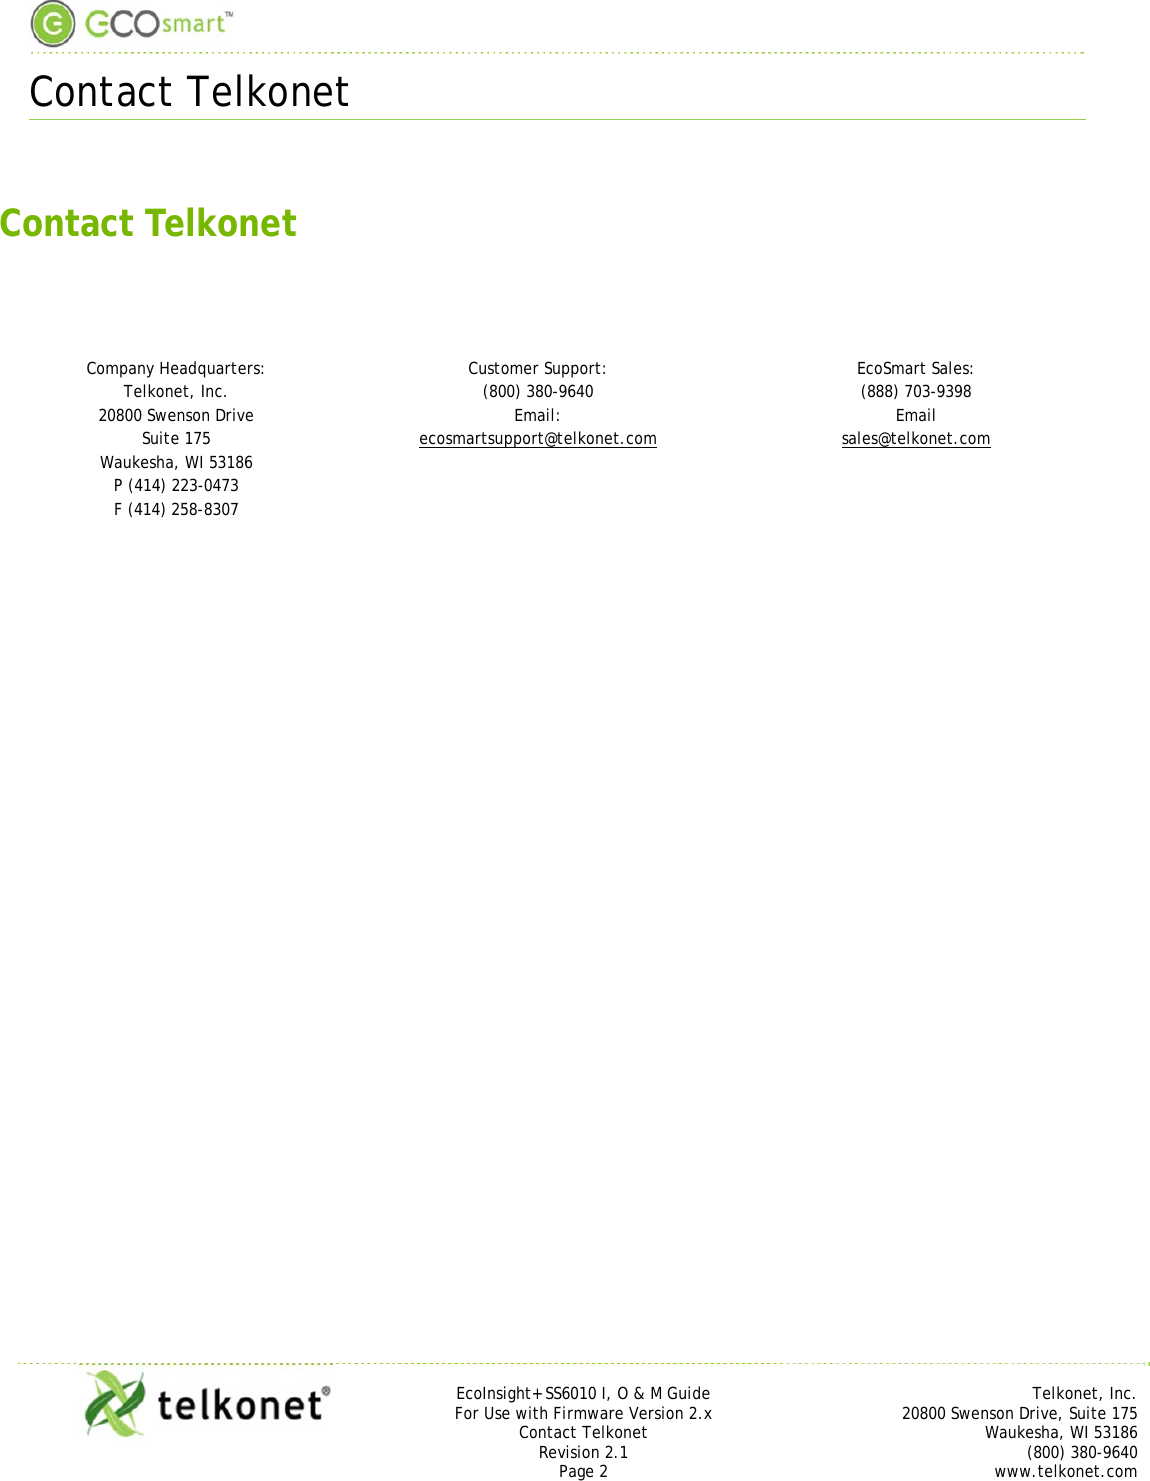  Contact Telkonet     EcoInsight+ SS6010 I, O &amp; M Guide Telkonet, Inc. For Use with Firmware Version 2.x 20800 Swenson Drive, Suite 175 Contact Telkonet Waukesha, WI 53186 Revision 2.1 (800) 380-9640 Page 2 www.telkonet.com   Contact Telkonet    Company Headquarters:  Customer Support: EcoSmart Sales: Telkonet, Inc.  (800) 380-9640 (888) 703-9398 20800 Swenson Drive  Email: Email Suite 175  ecosmartsupport@telkonet.com sales@telkonet.com Waukesha, WI 53186   P (414) 223-0473   F (414) 258-8307        